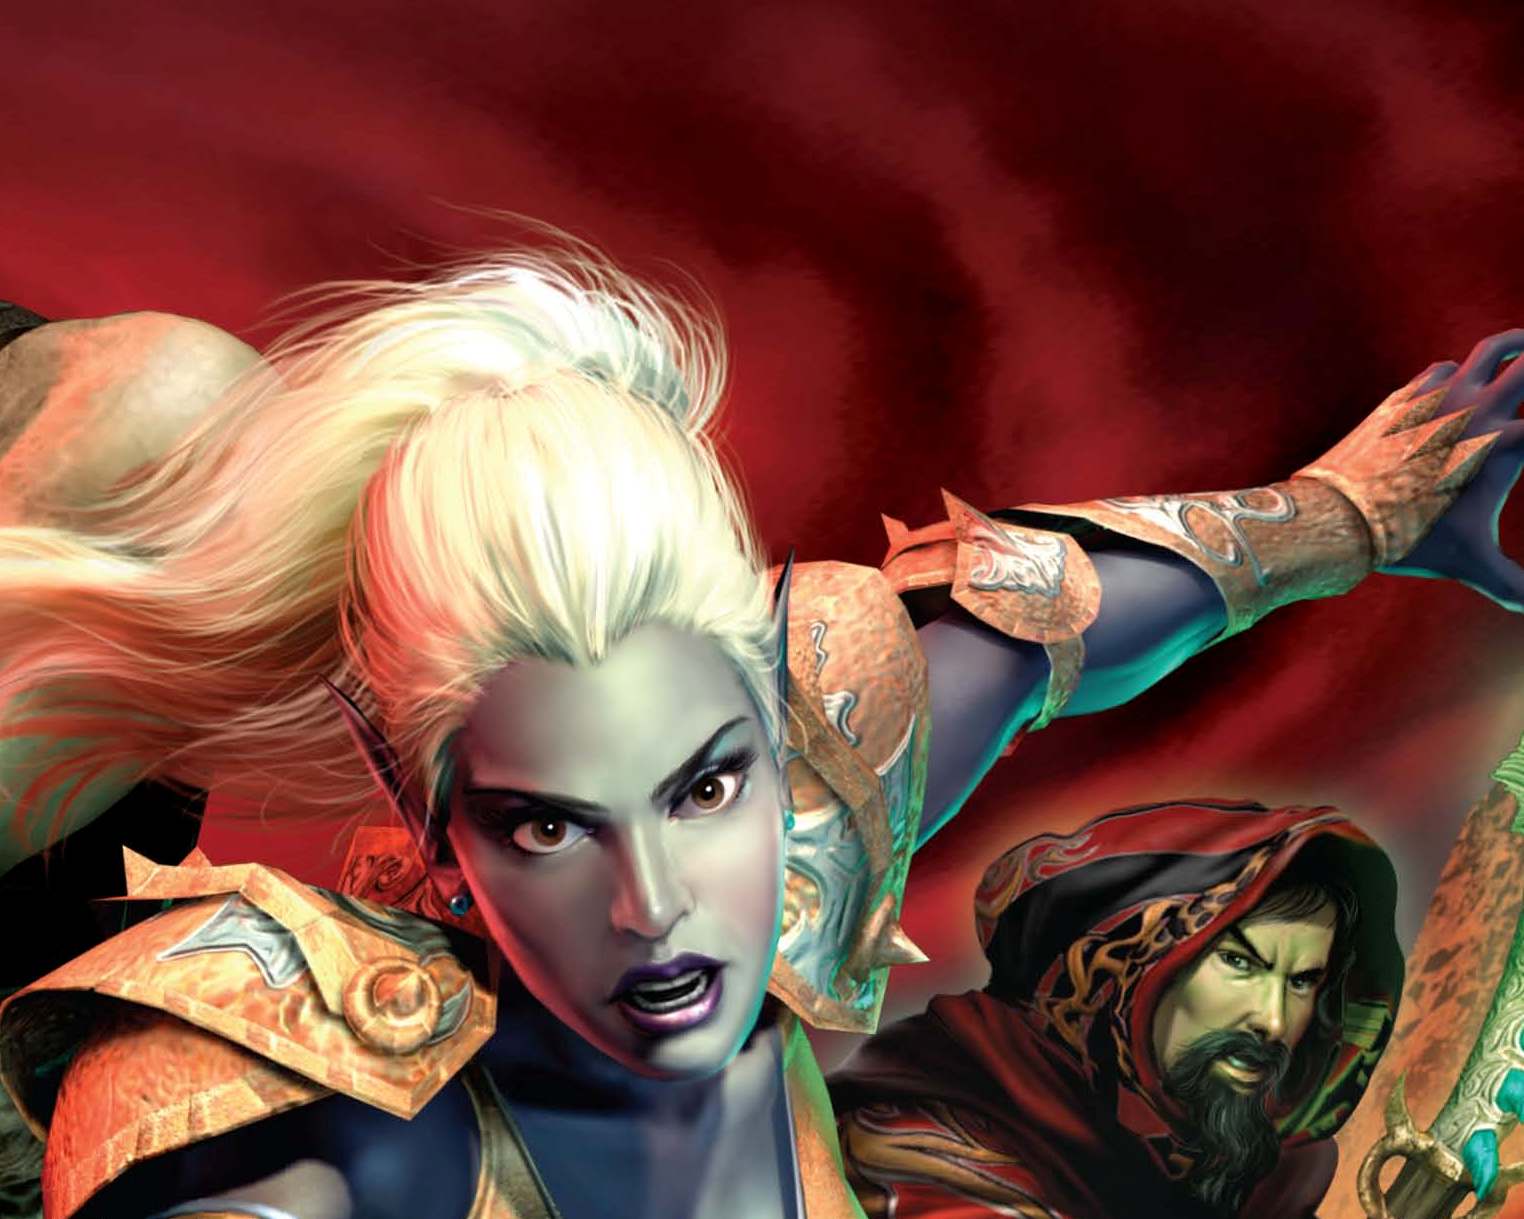 Video Game EverQuest HD Wallpaper | Background Image